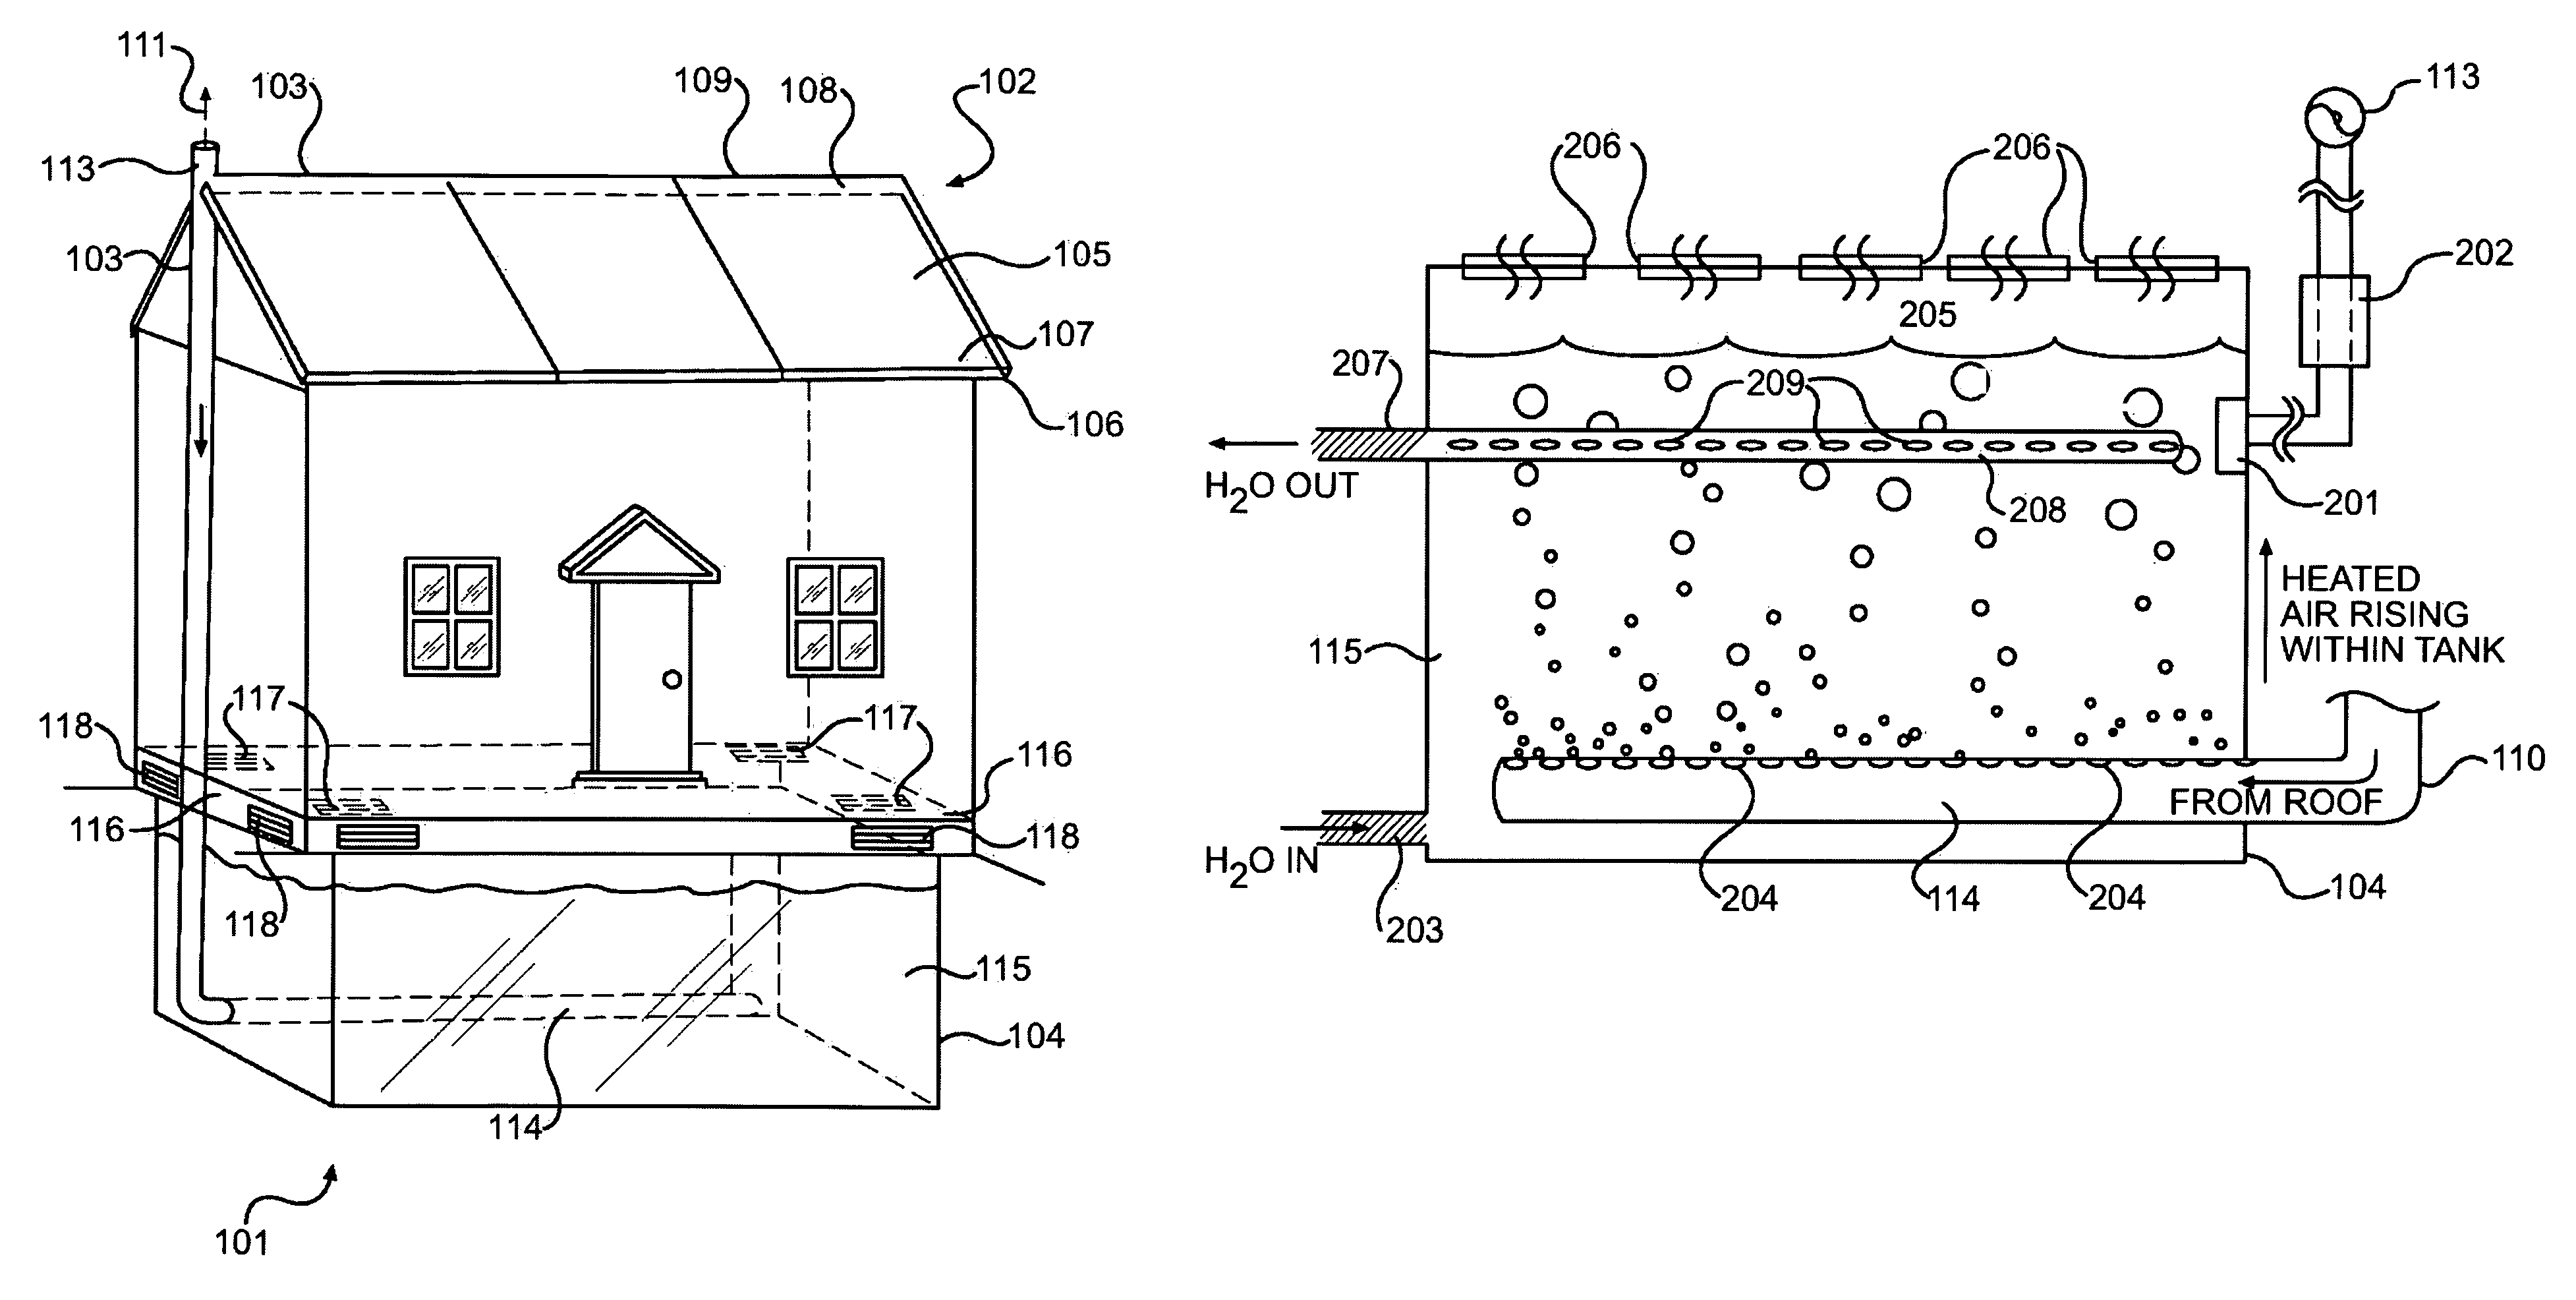 Method and device for capture, storage and recirculation of heat energy